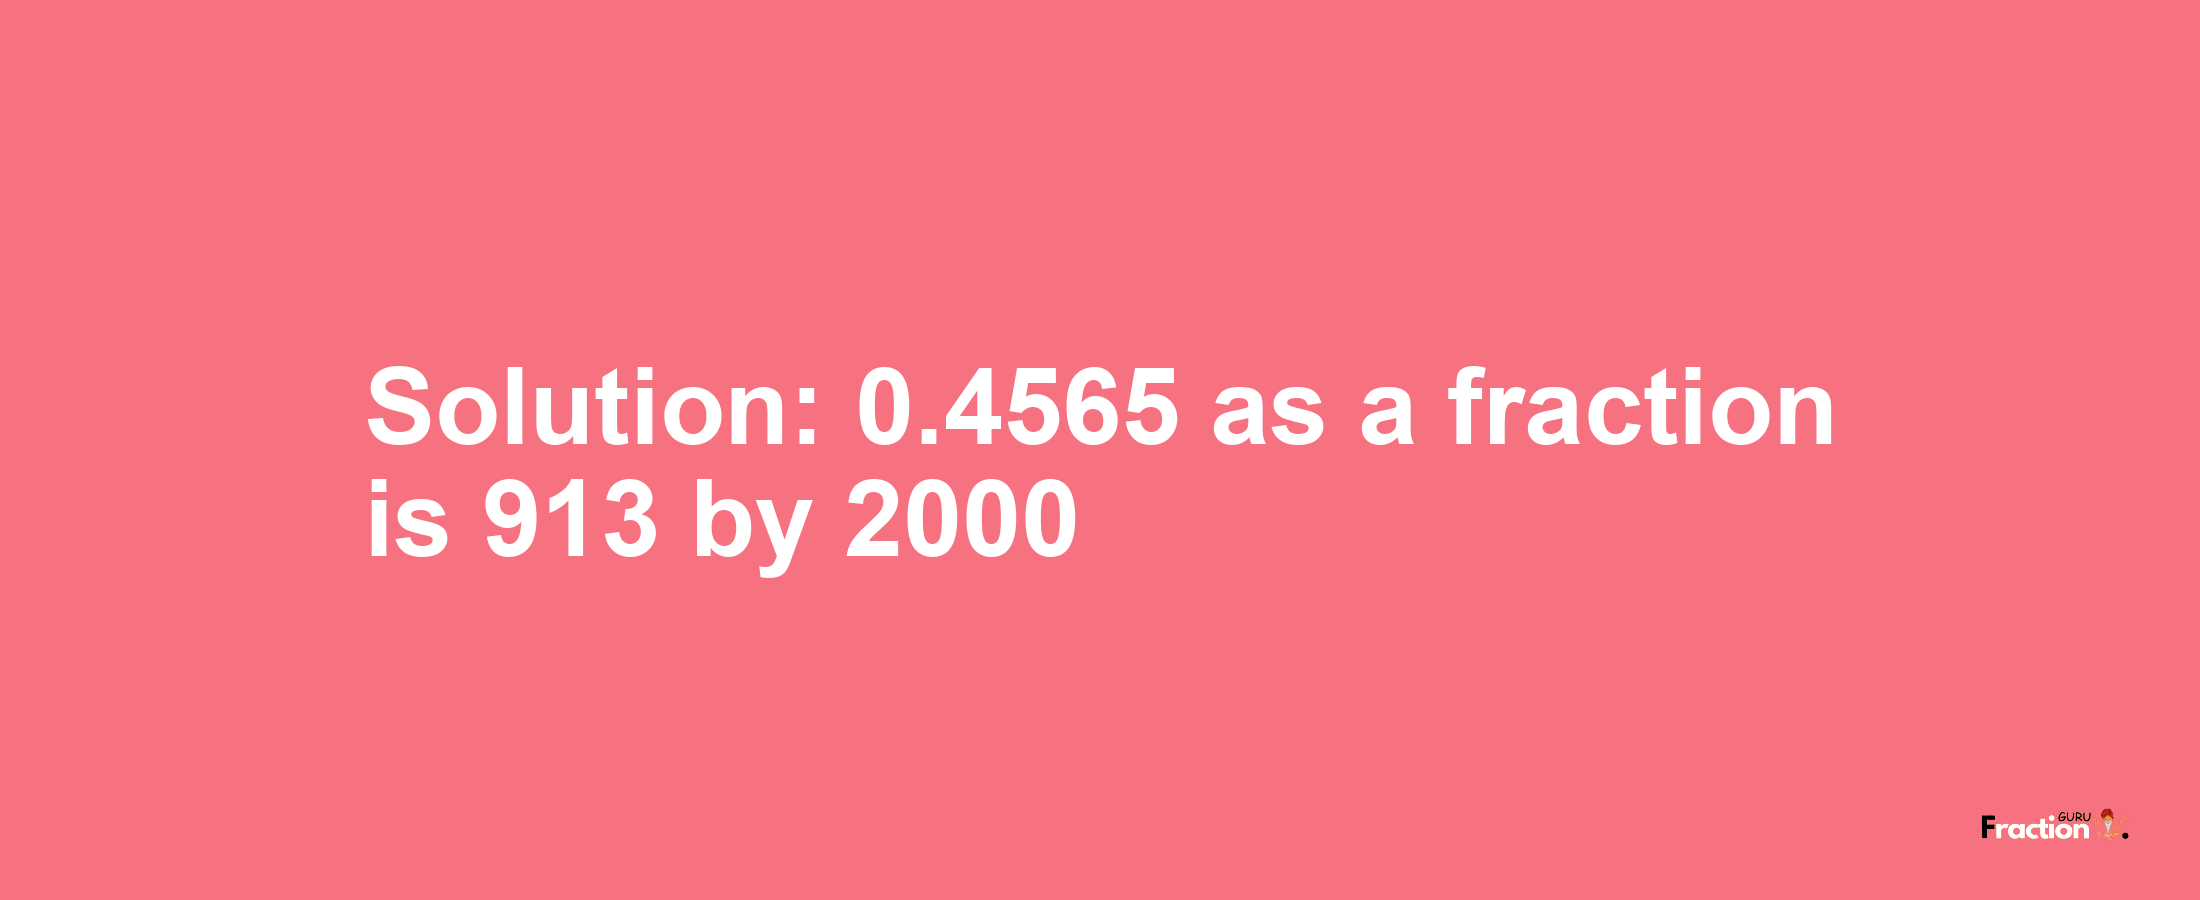 Solution:0.4565 as a fraction is 913/2000